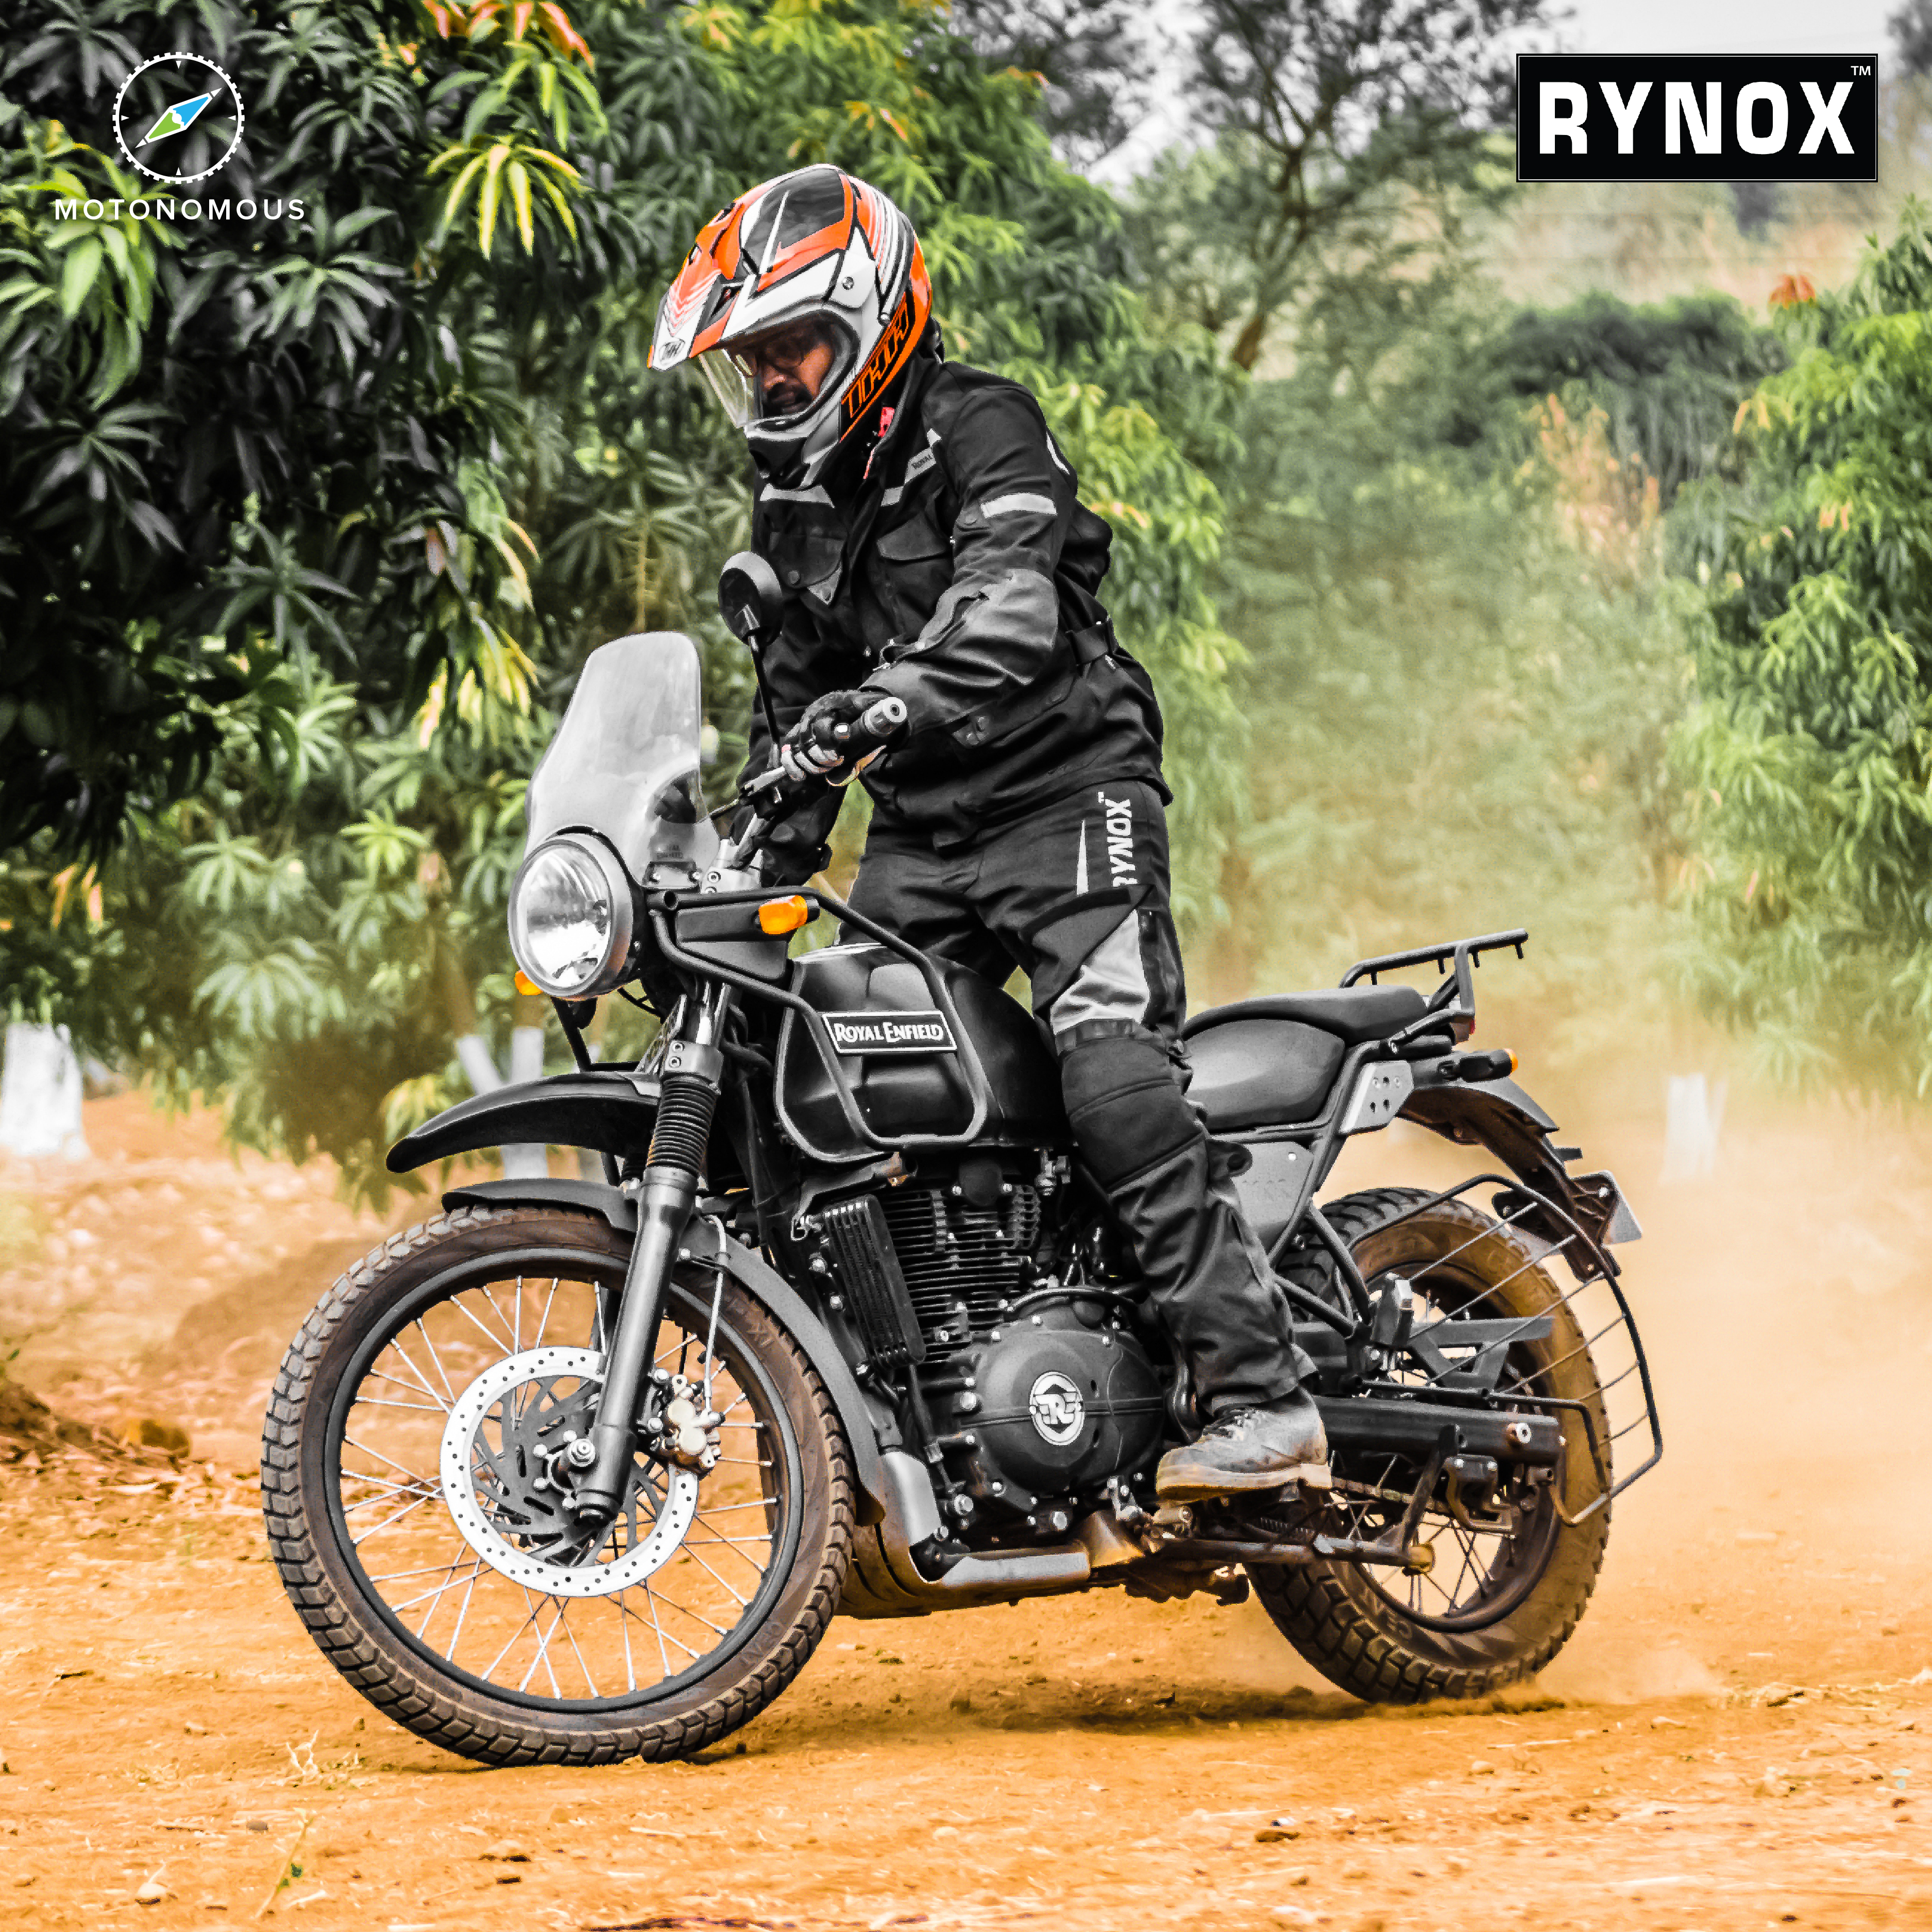 Rynox Advento Pants - Motorcycle Riding Pants | Impact Protection |  Abrasion Resistance | Active Ventilation - Black | Small : Amazon.in: Car &  Motorbike